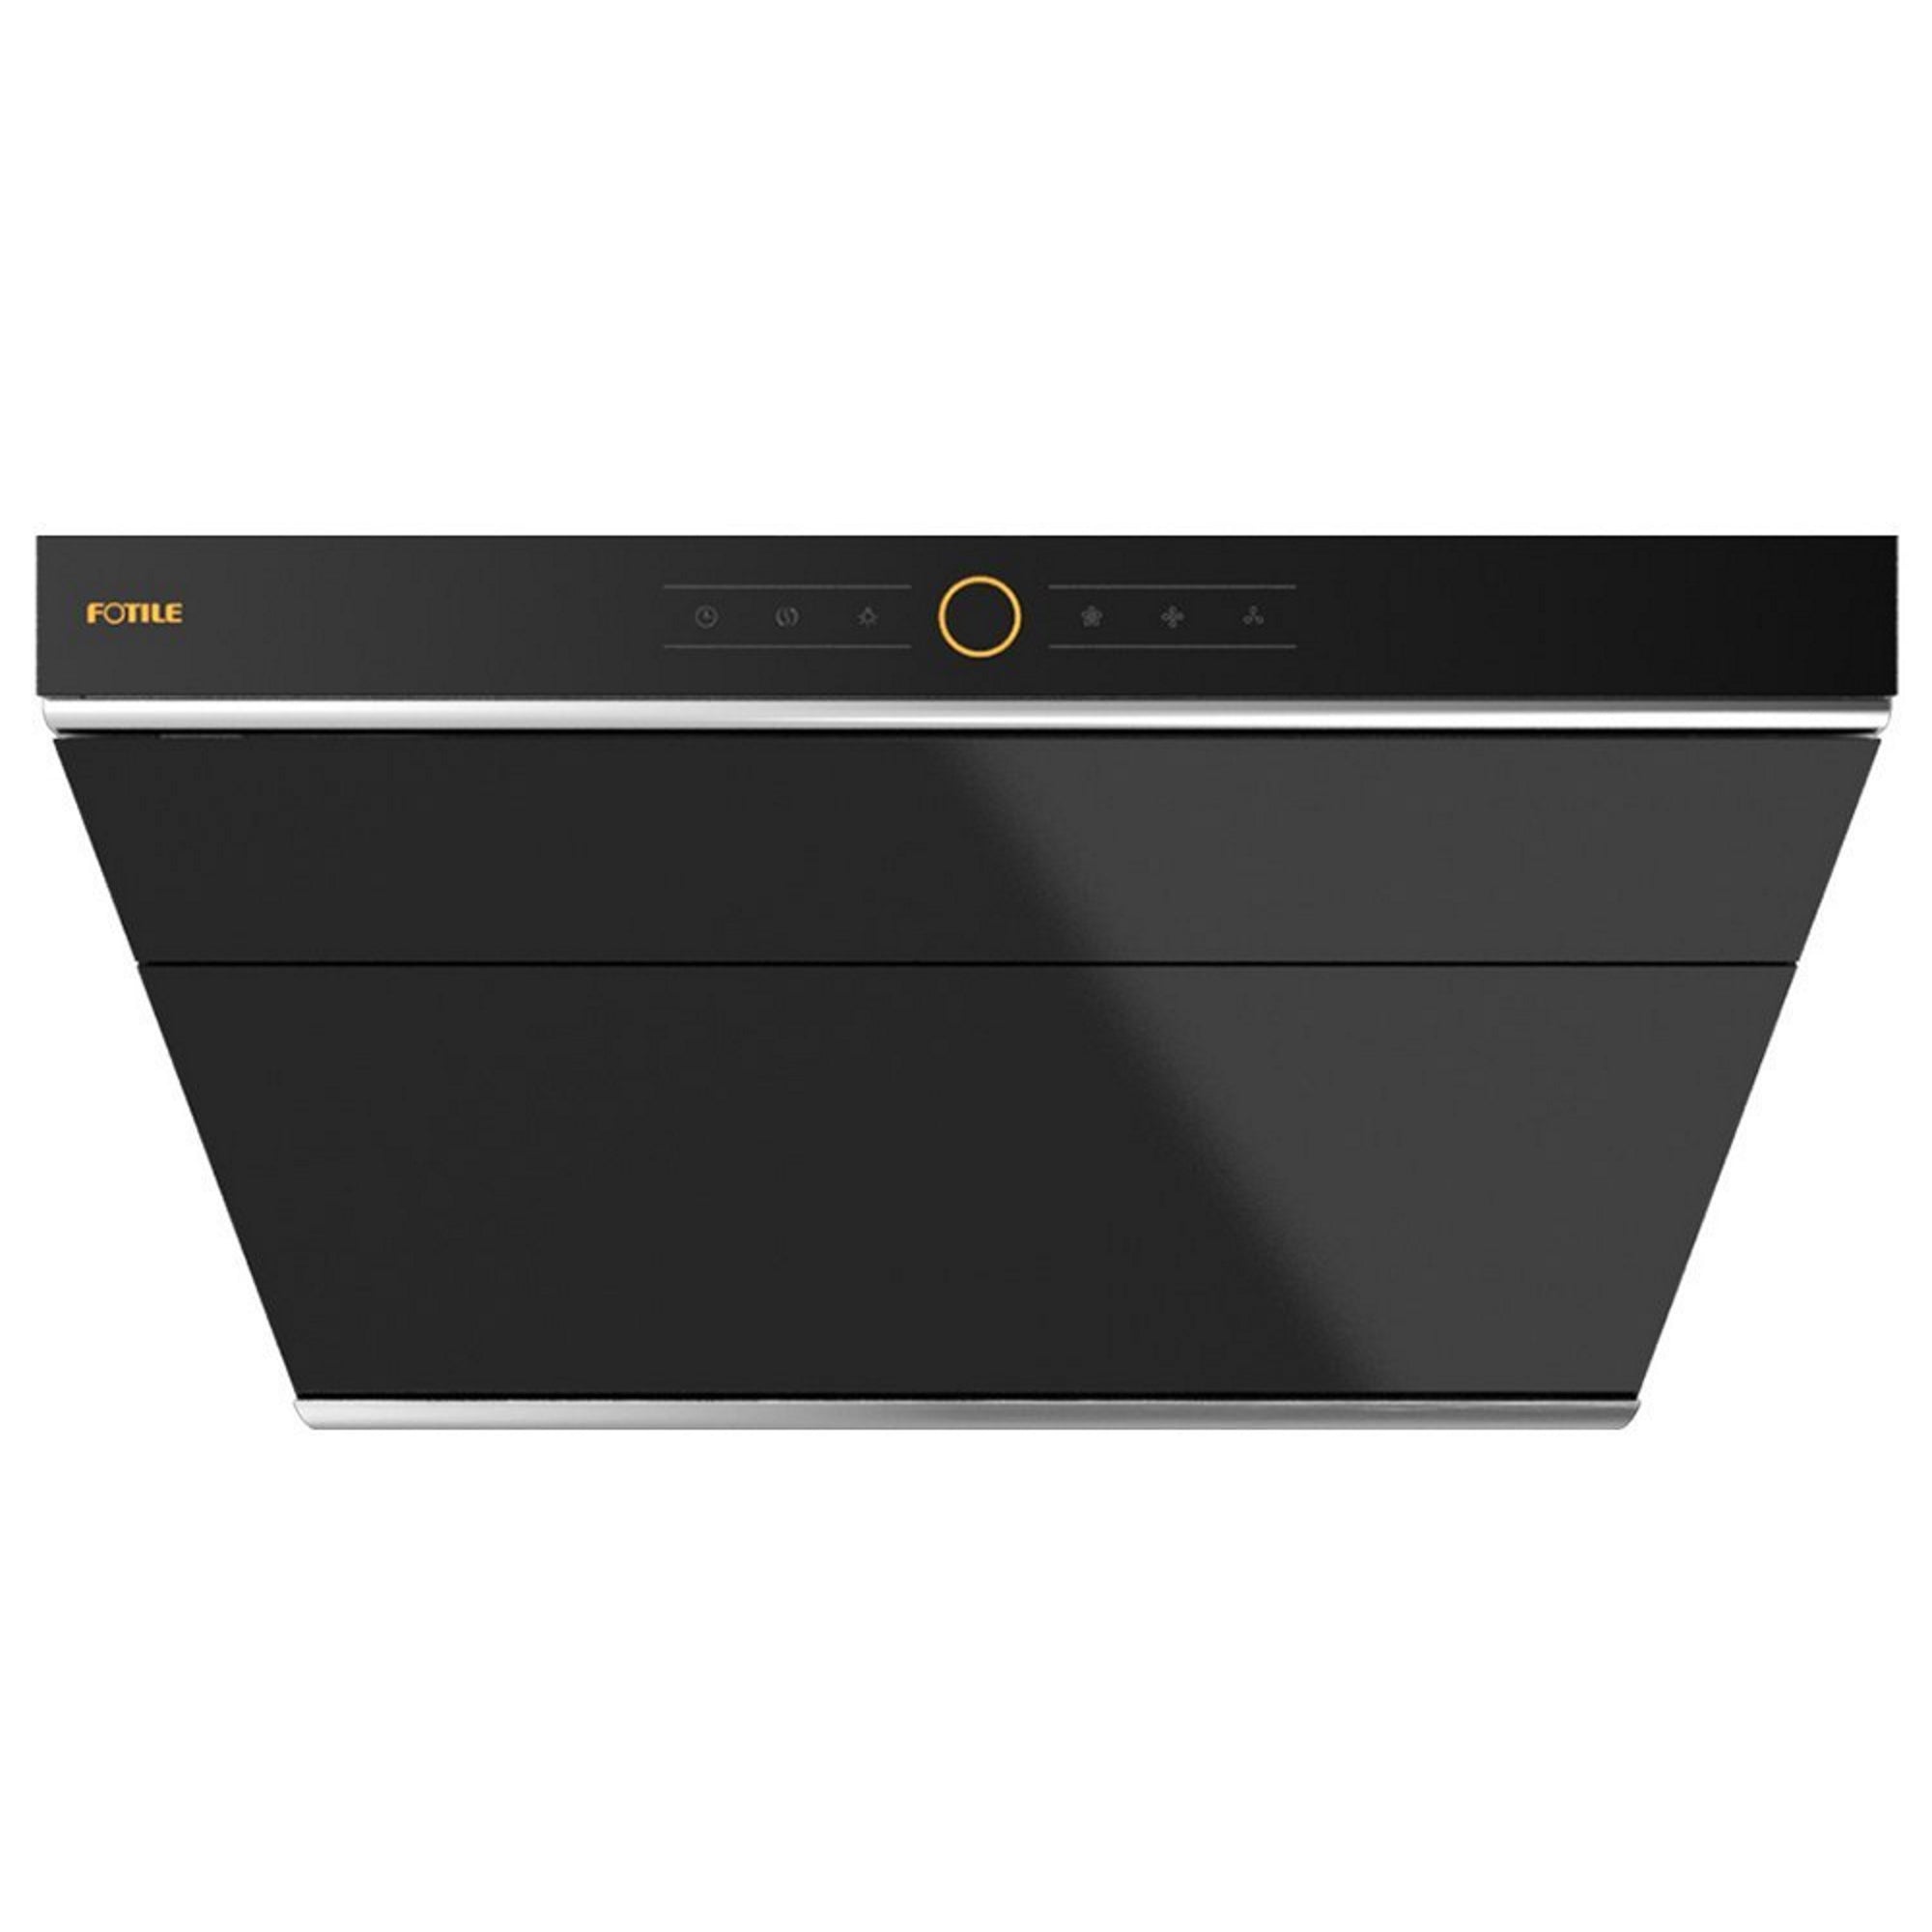 Chinese Manufacturer Fotile Designs an Exhaust Hood That Actually Exhausts